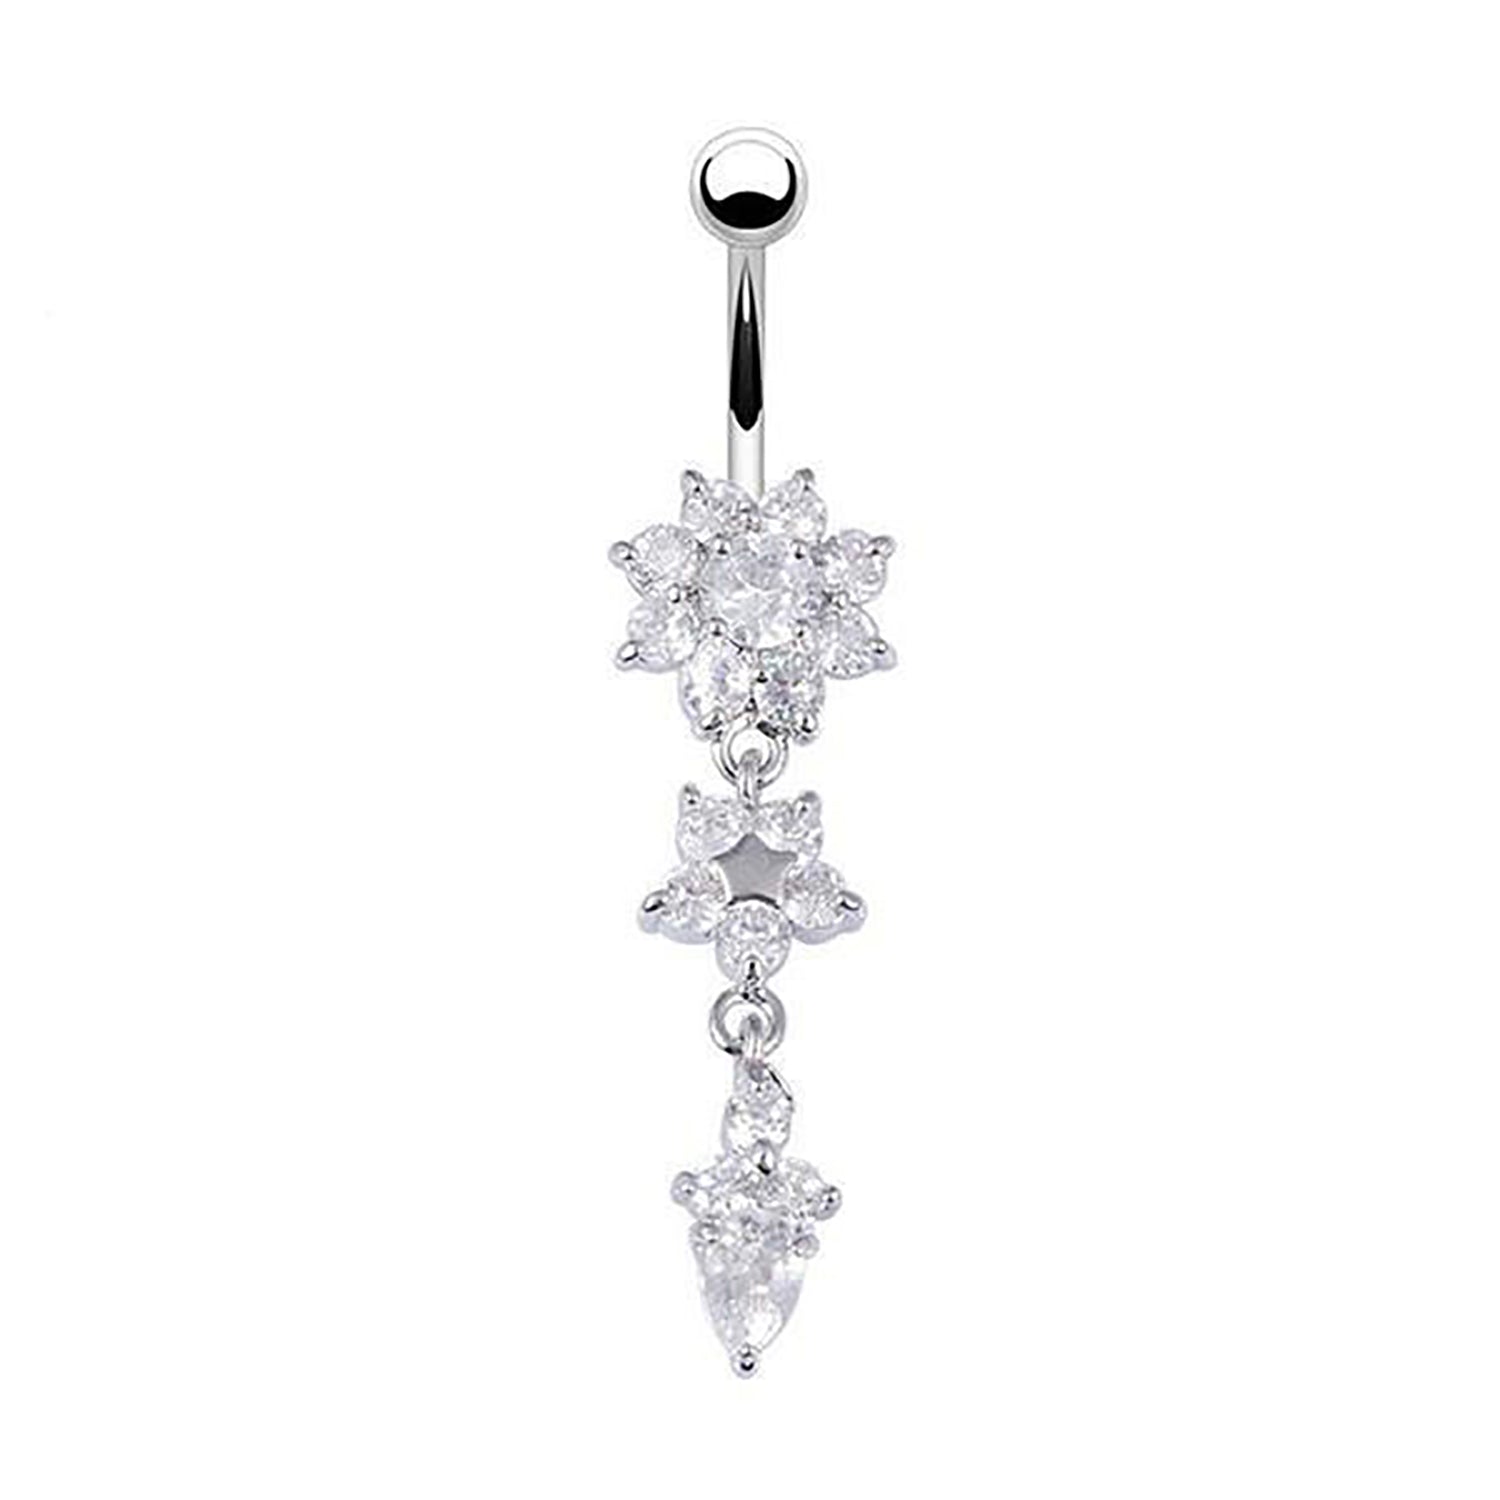 Miss A Body Jewelry - Dangle Belly Button Ring – Shop Miss A